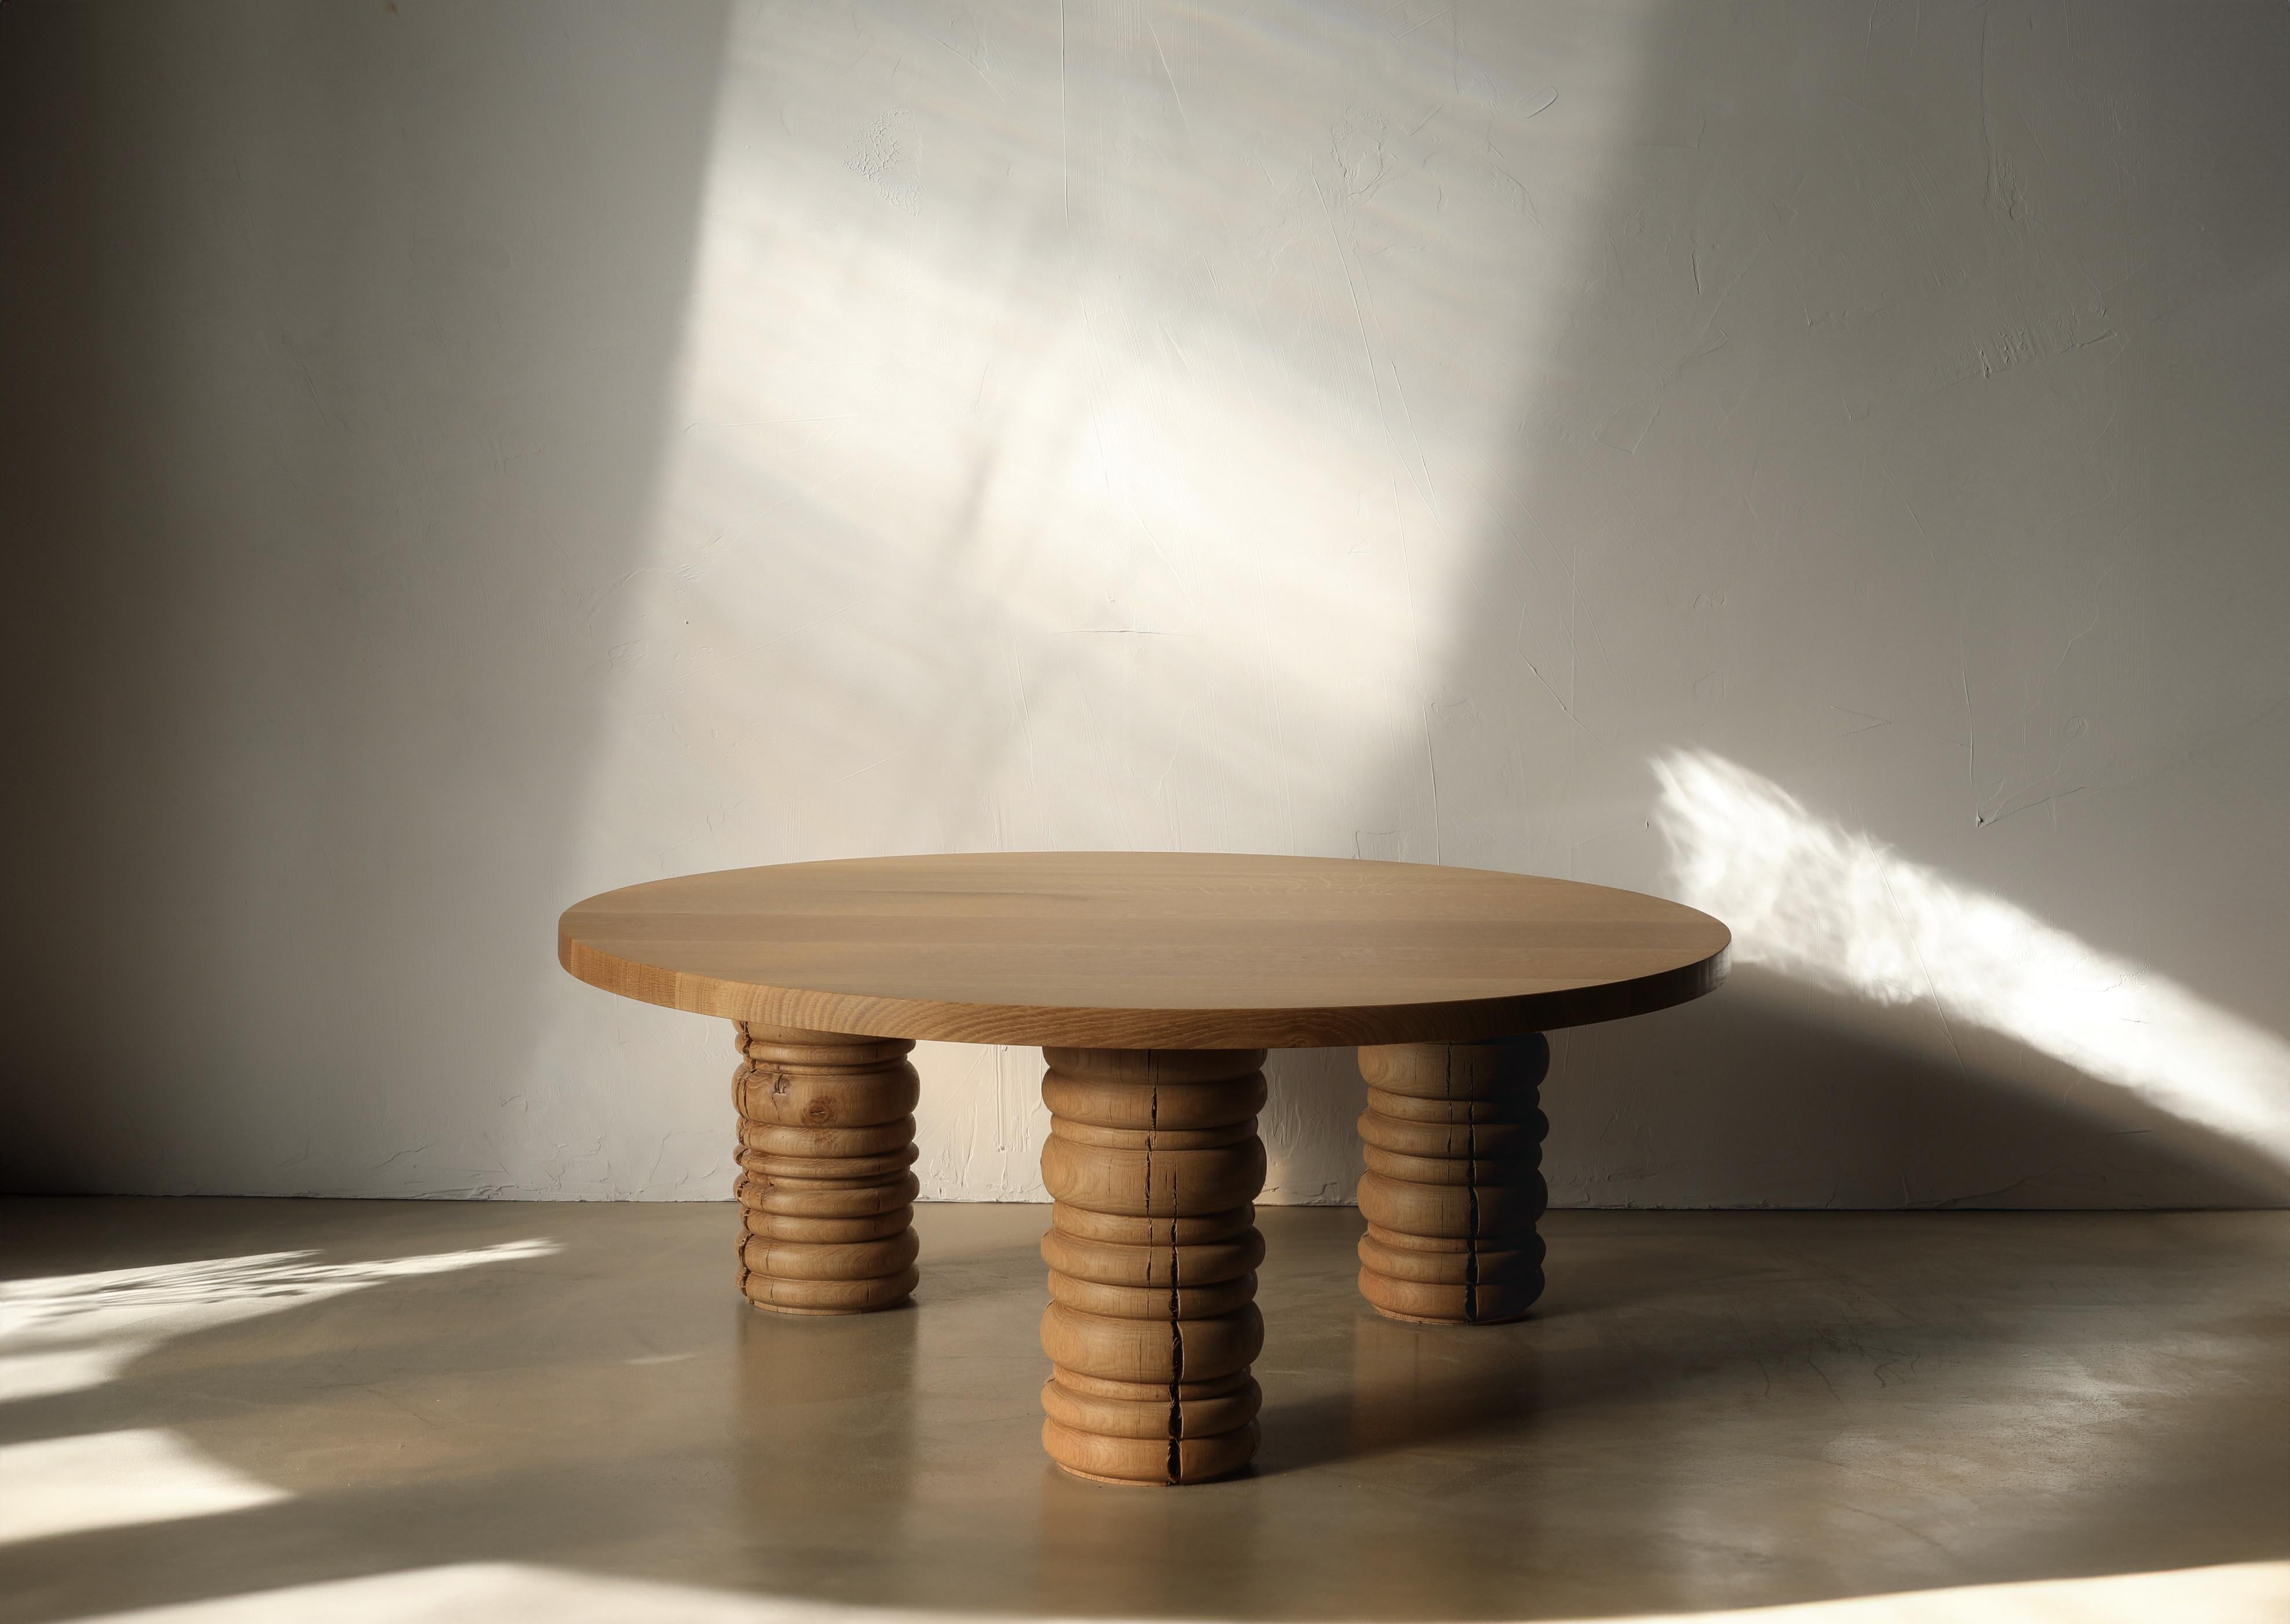 The round Bead coffee table is 42” in diameter and 16” high. The default top is rift-sawn white oak and the bases are solid white oak. Materials, finishes, and sizes may be optioned out at additional cost.

BEAD - This collection is a blend of